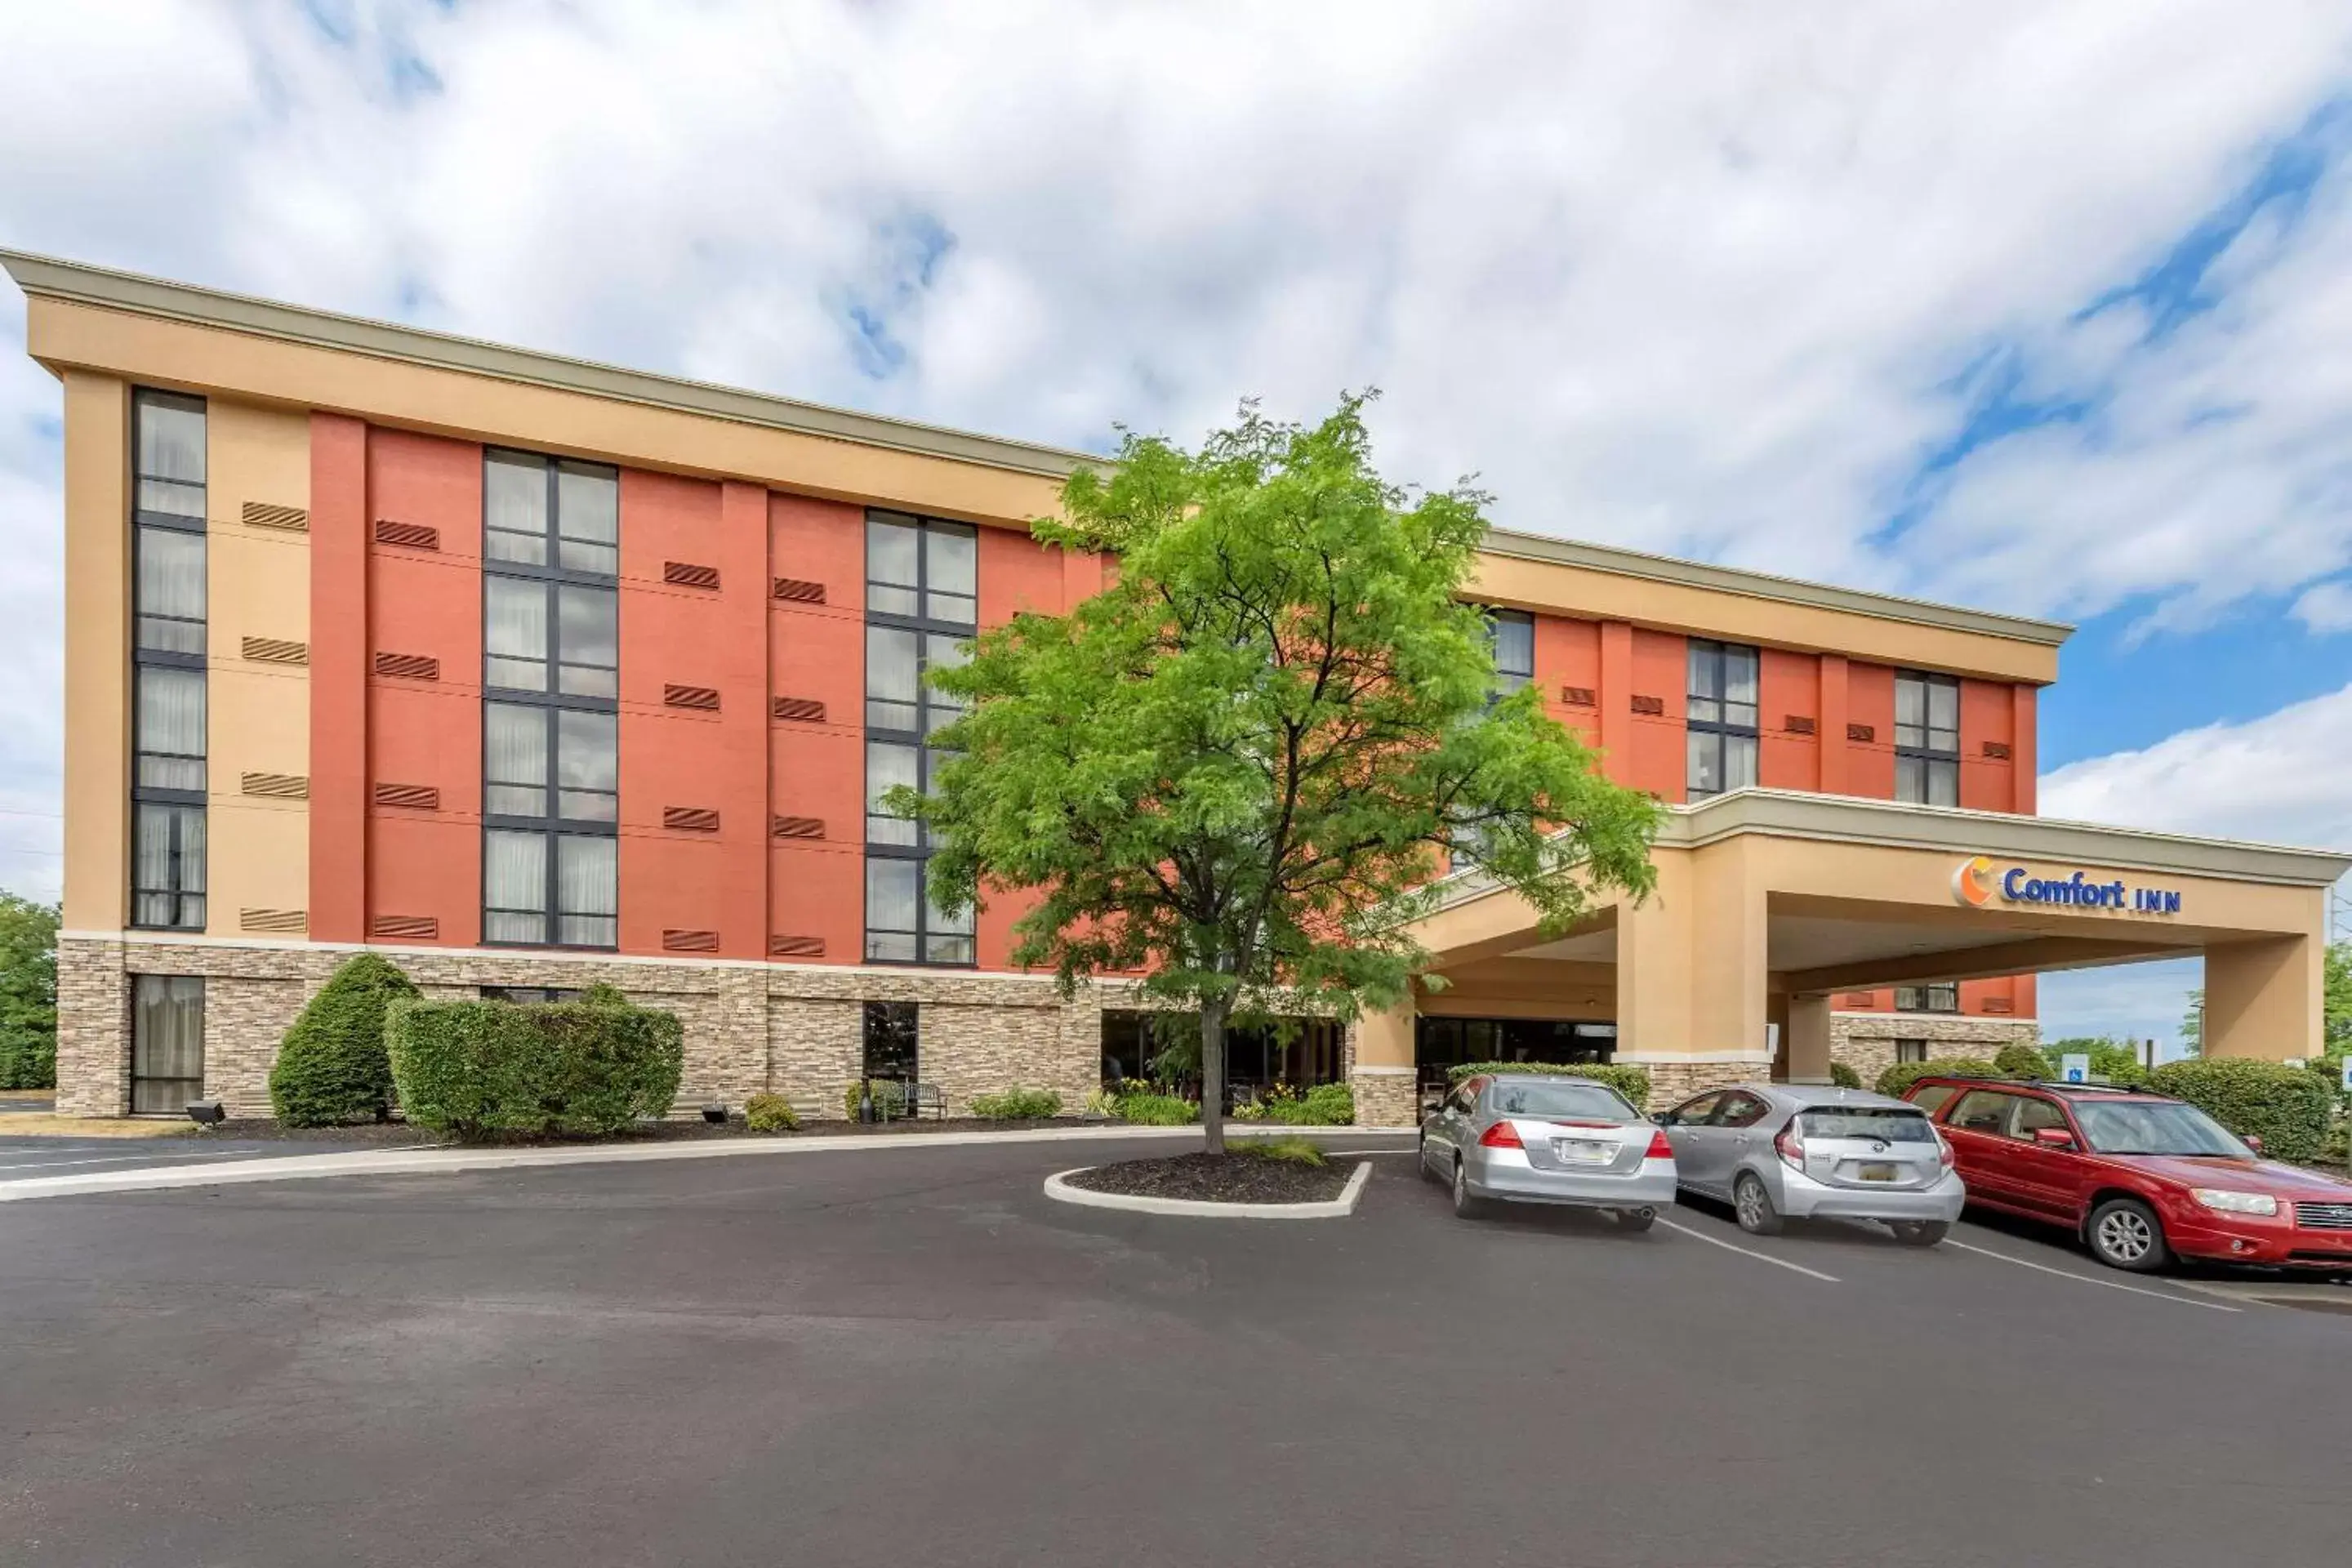 Property Building in Comfort Inn Cranberry Township